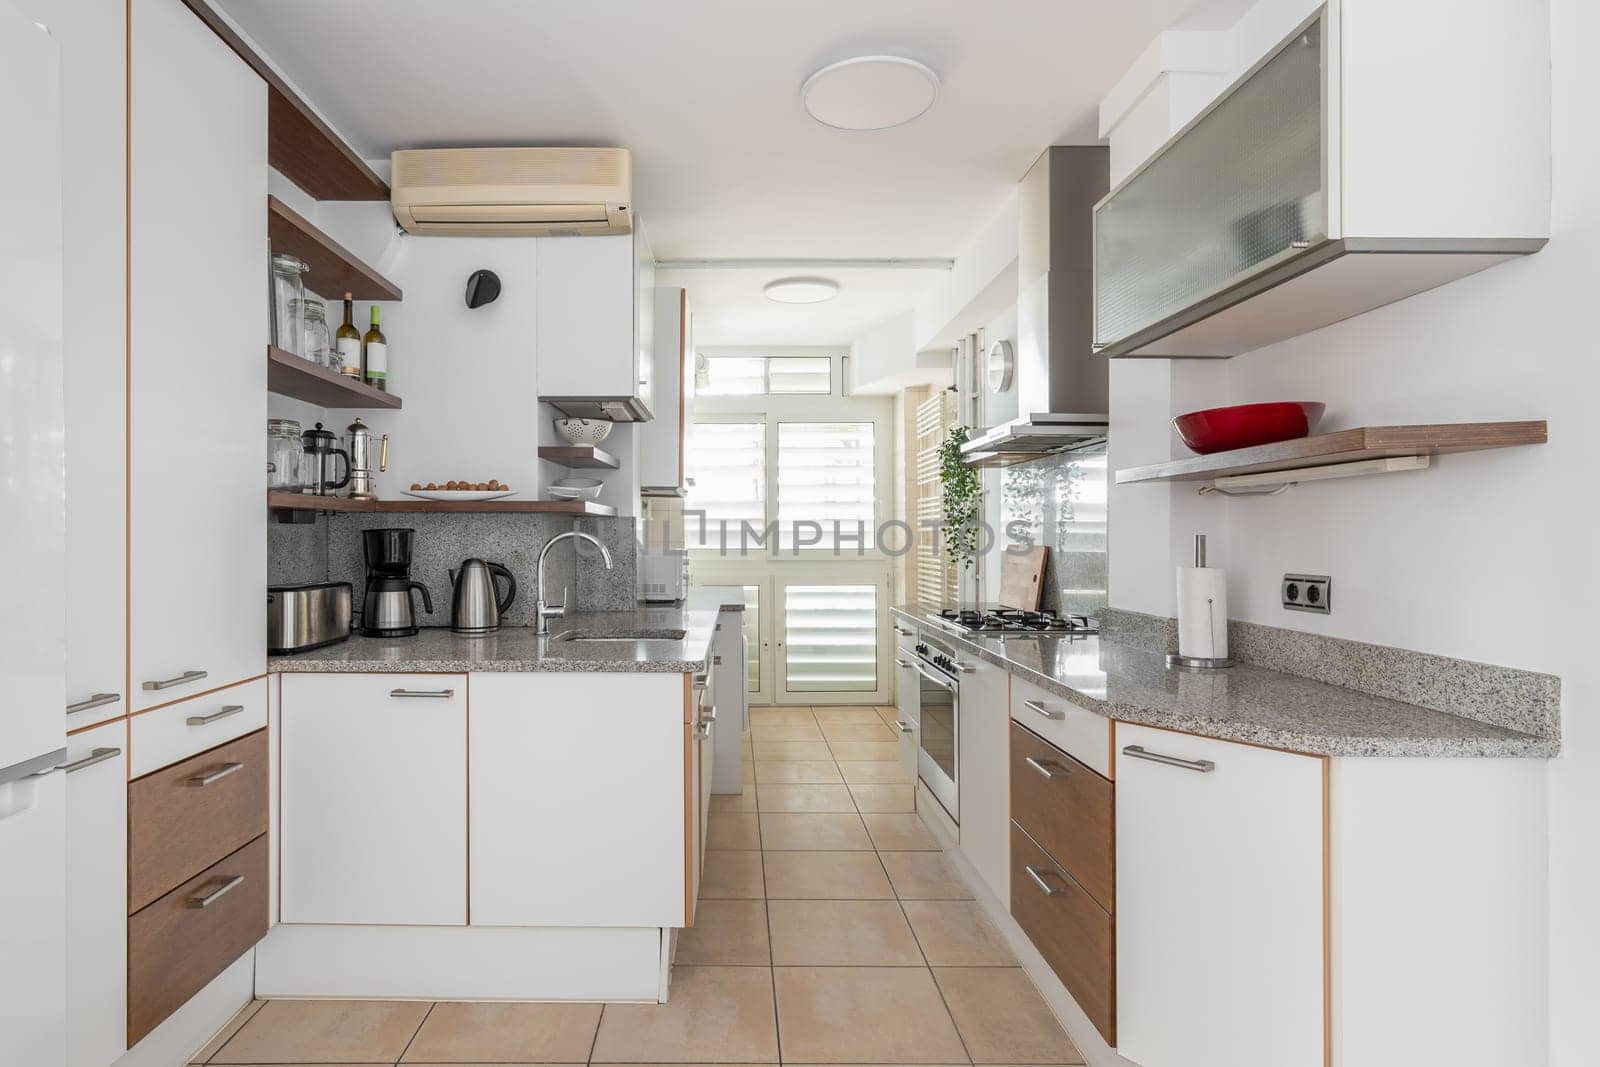 Kitchen zone equipped with cooking appliances and furniture in smart apartment. Idea of limited space living organization in studio flat